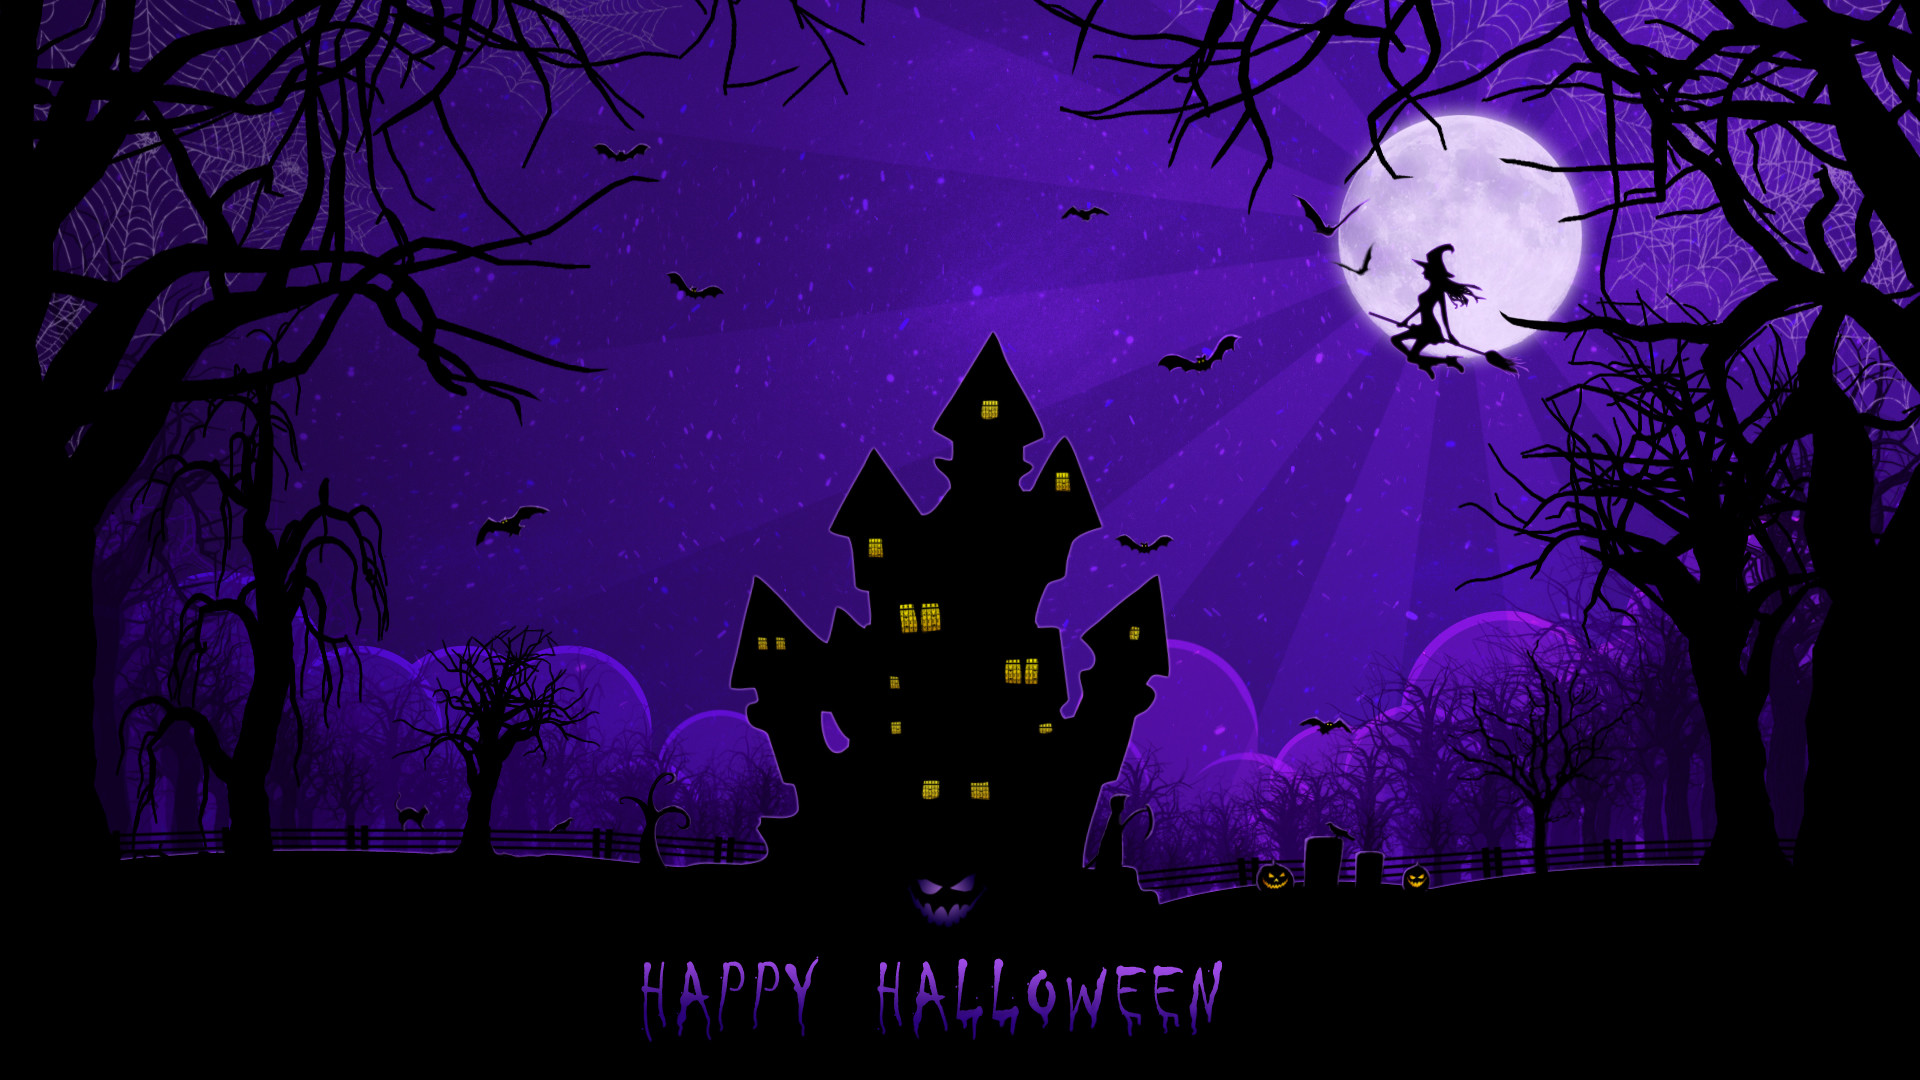 1920x1080 Scary Halloween Backgrounds HD.